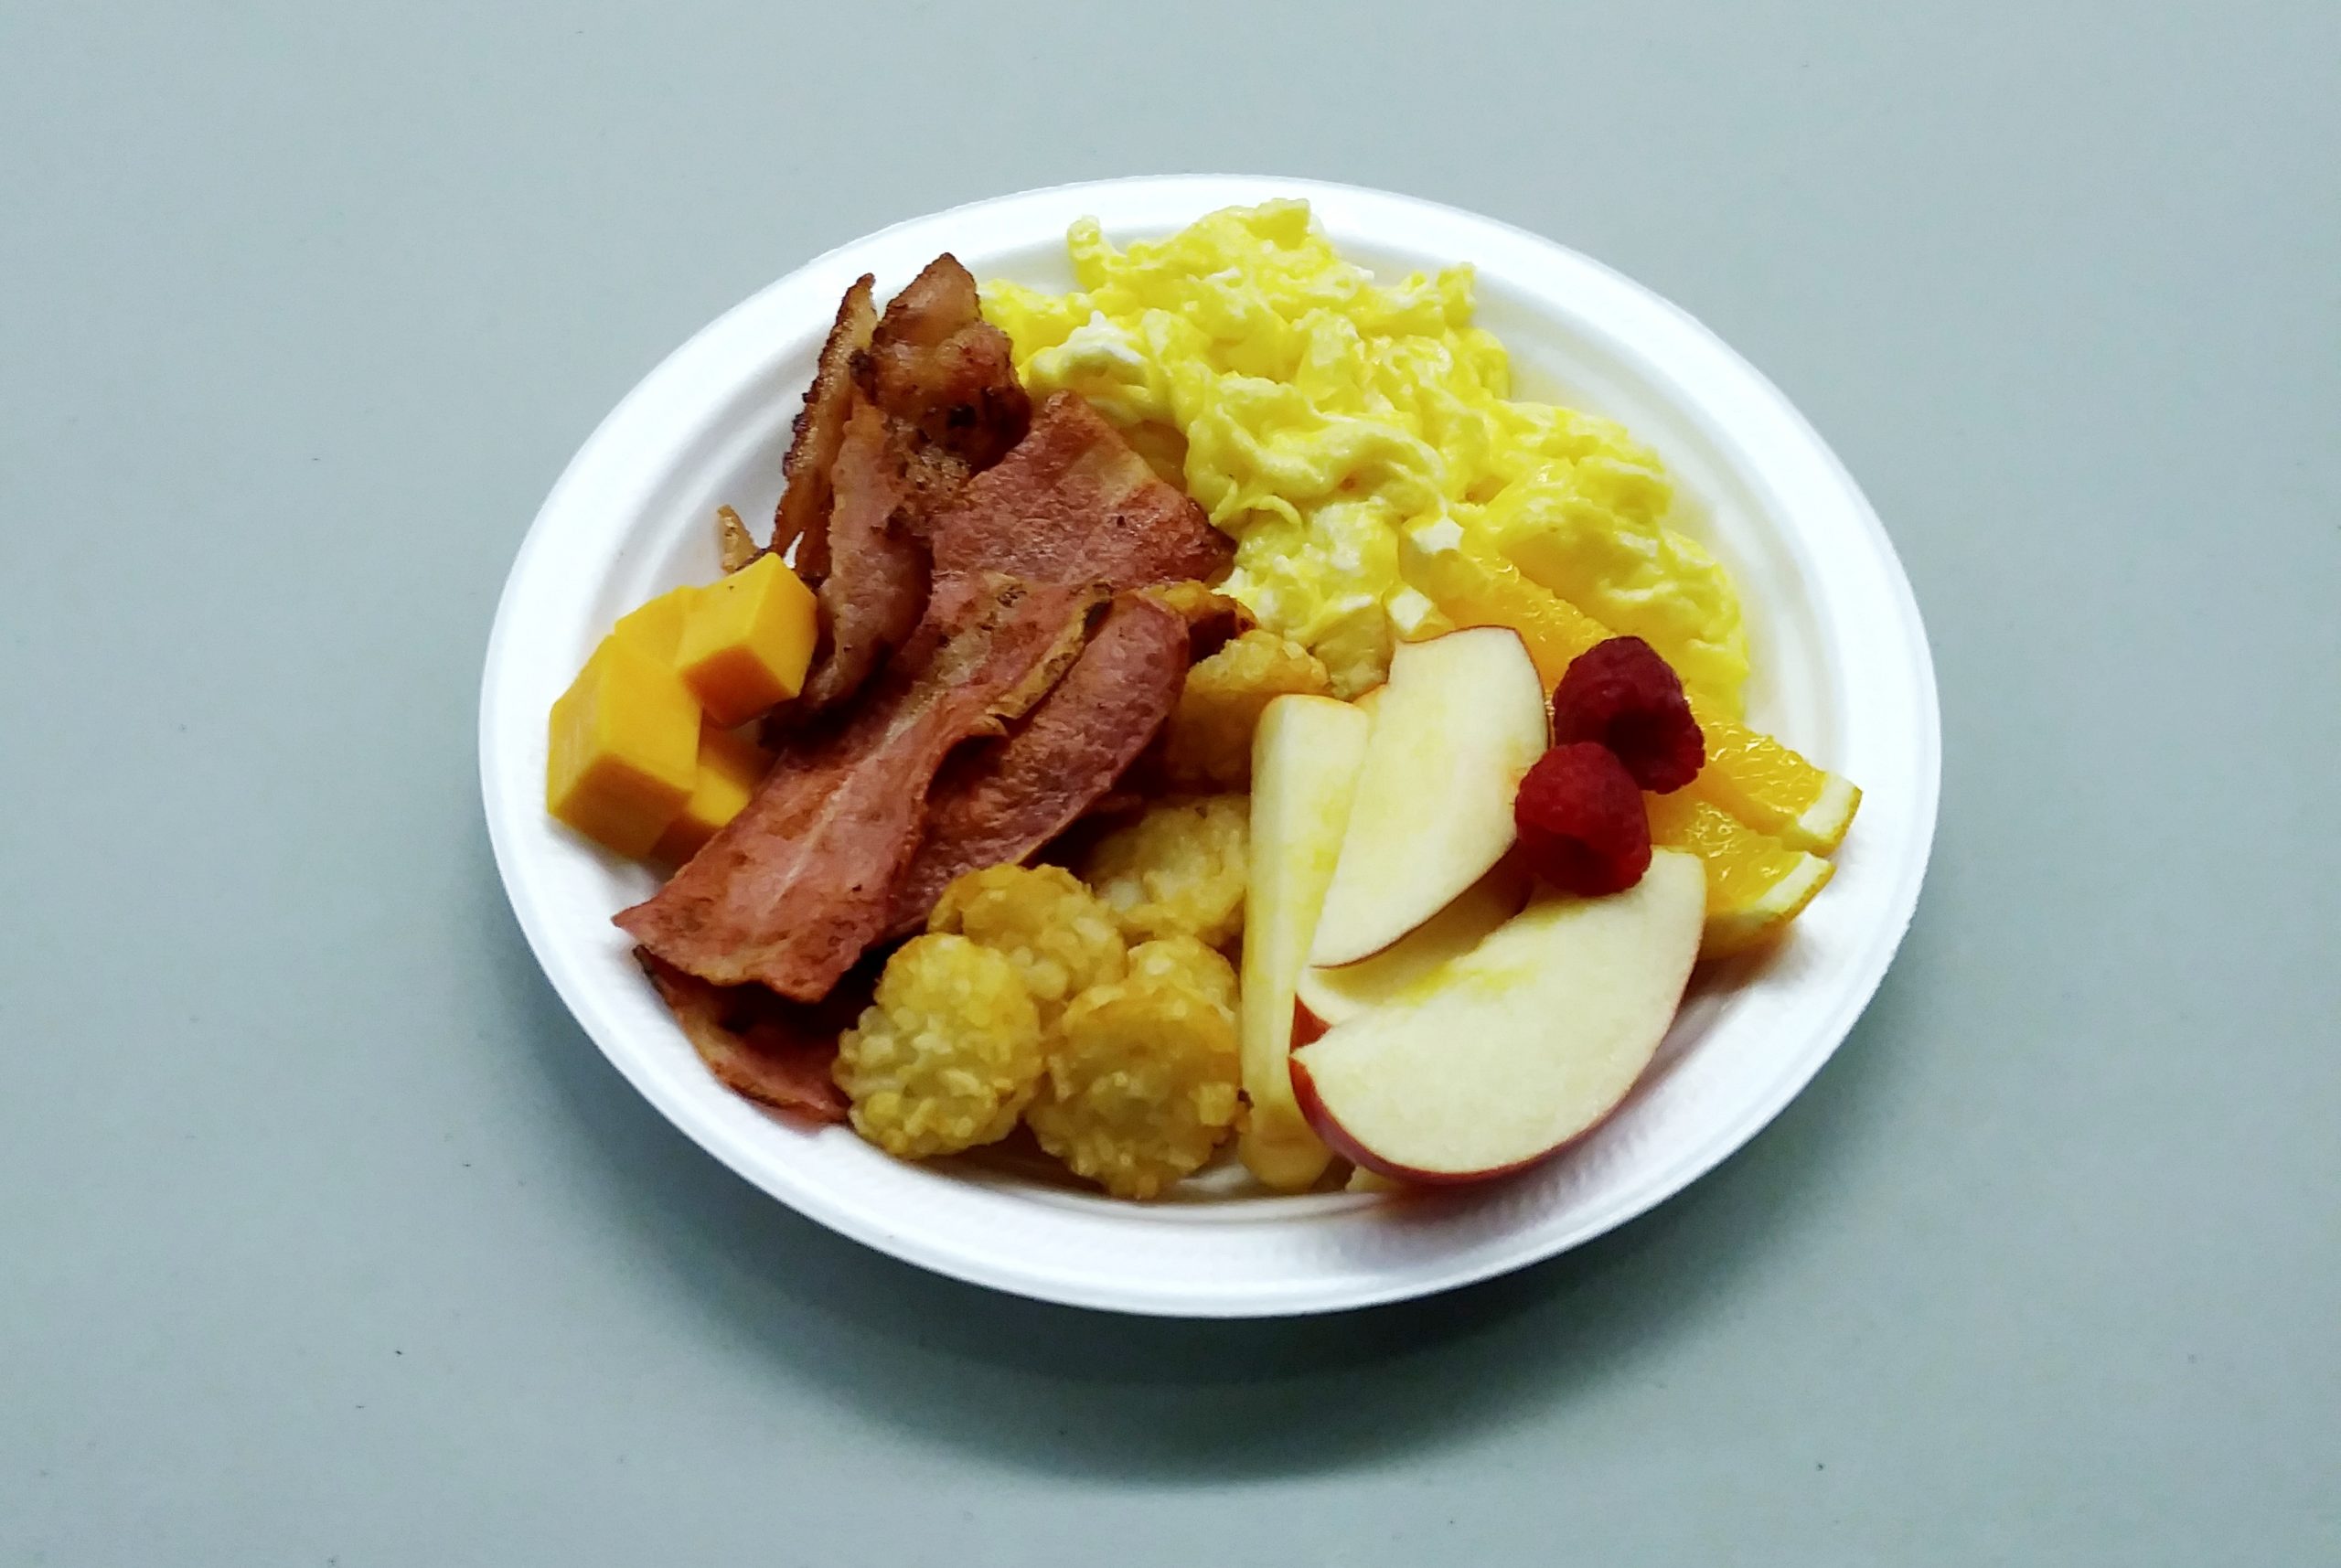 A healthy breakfast is provided every Friday at the Rivertowne Breakfast Program, Riverside, Toronto